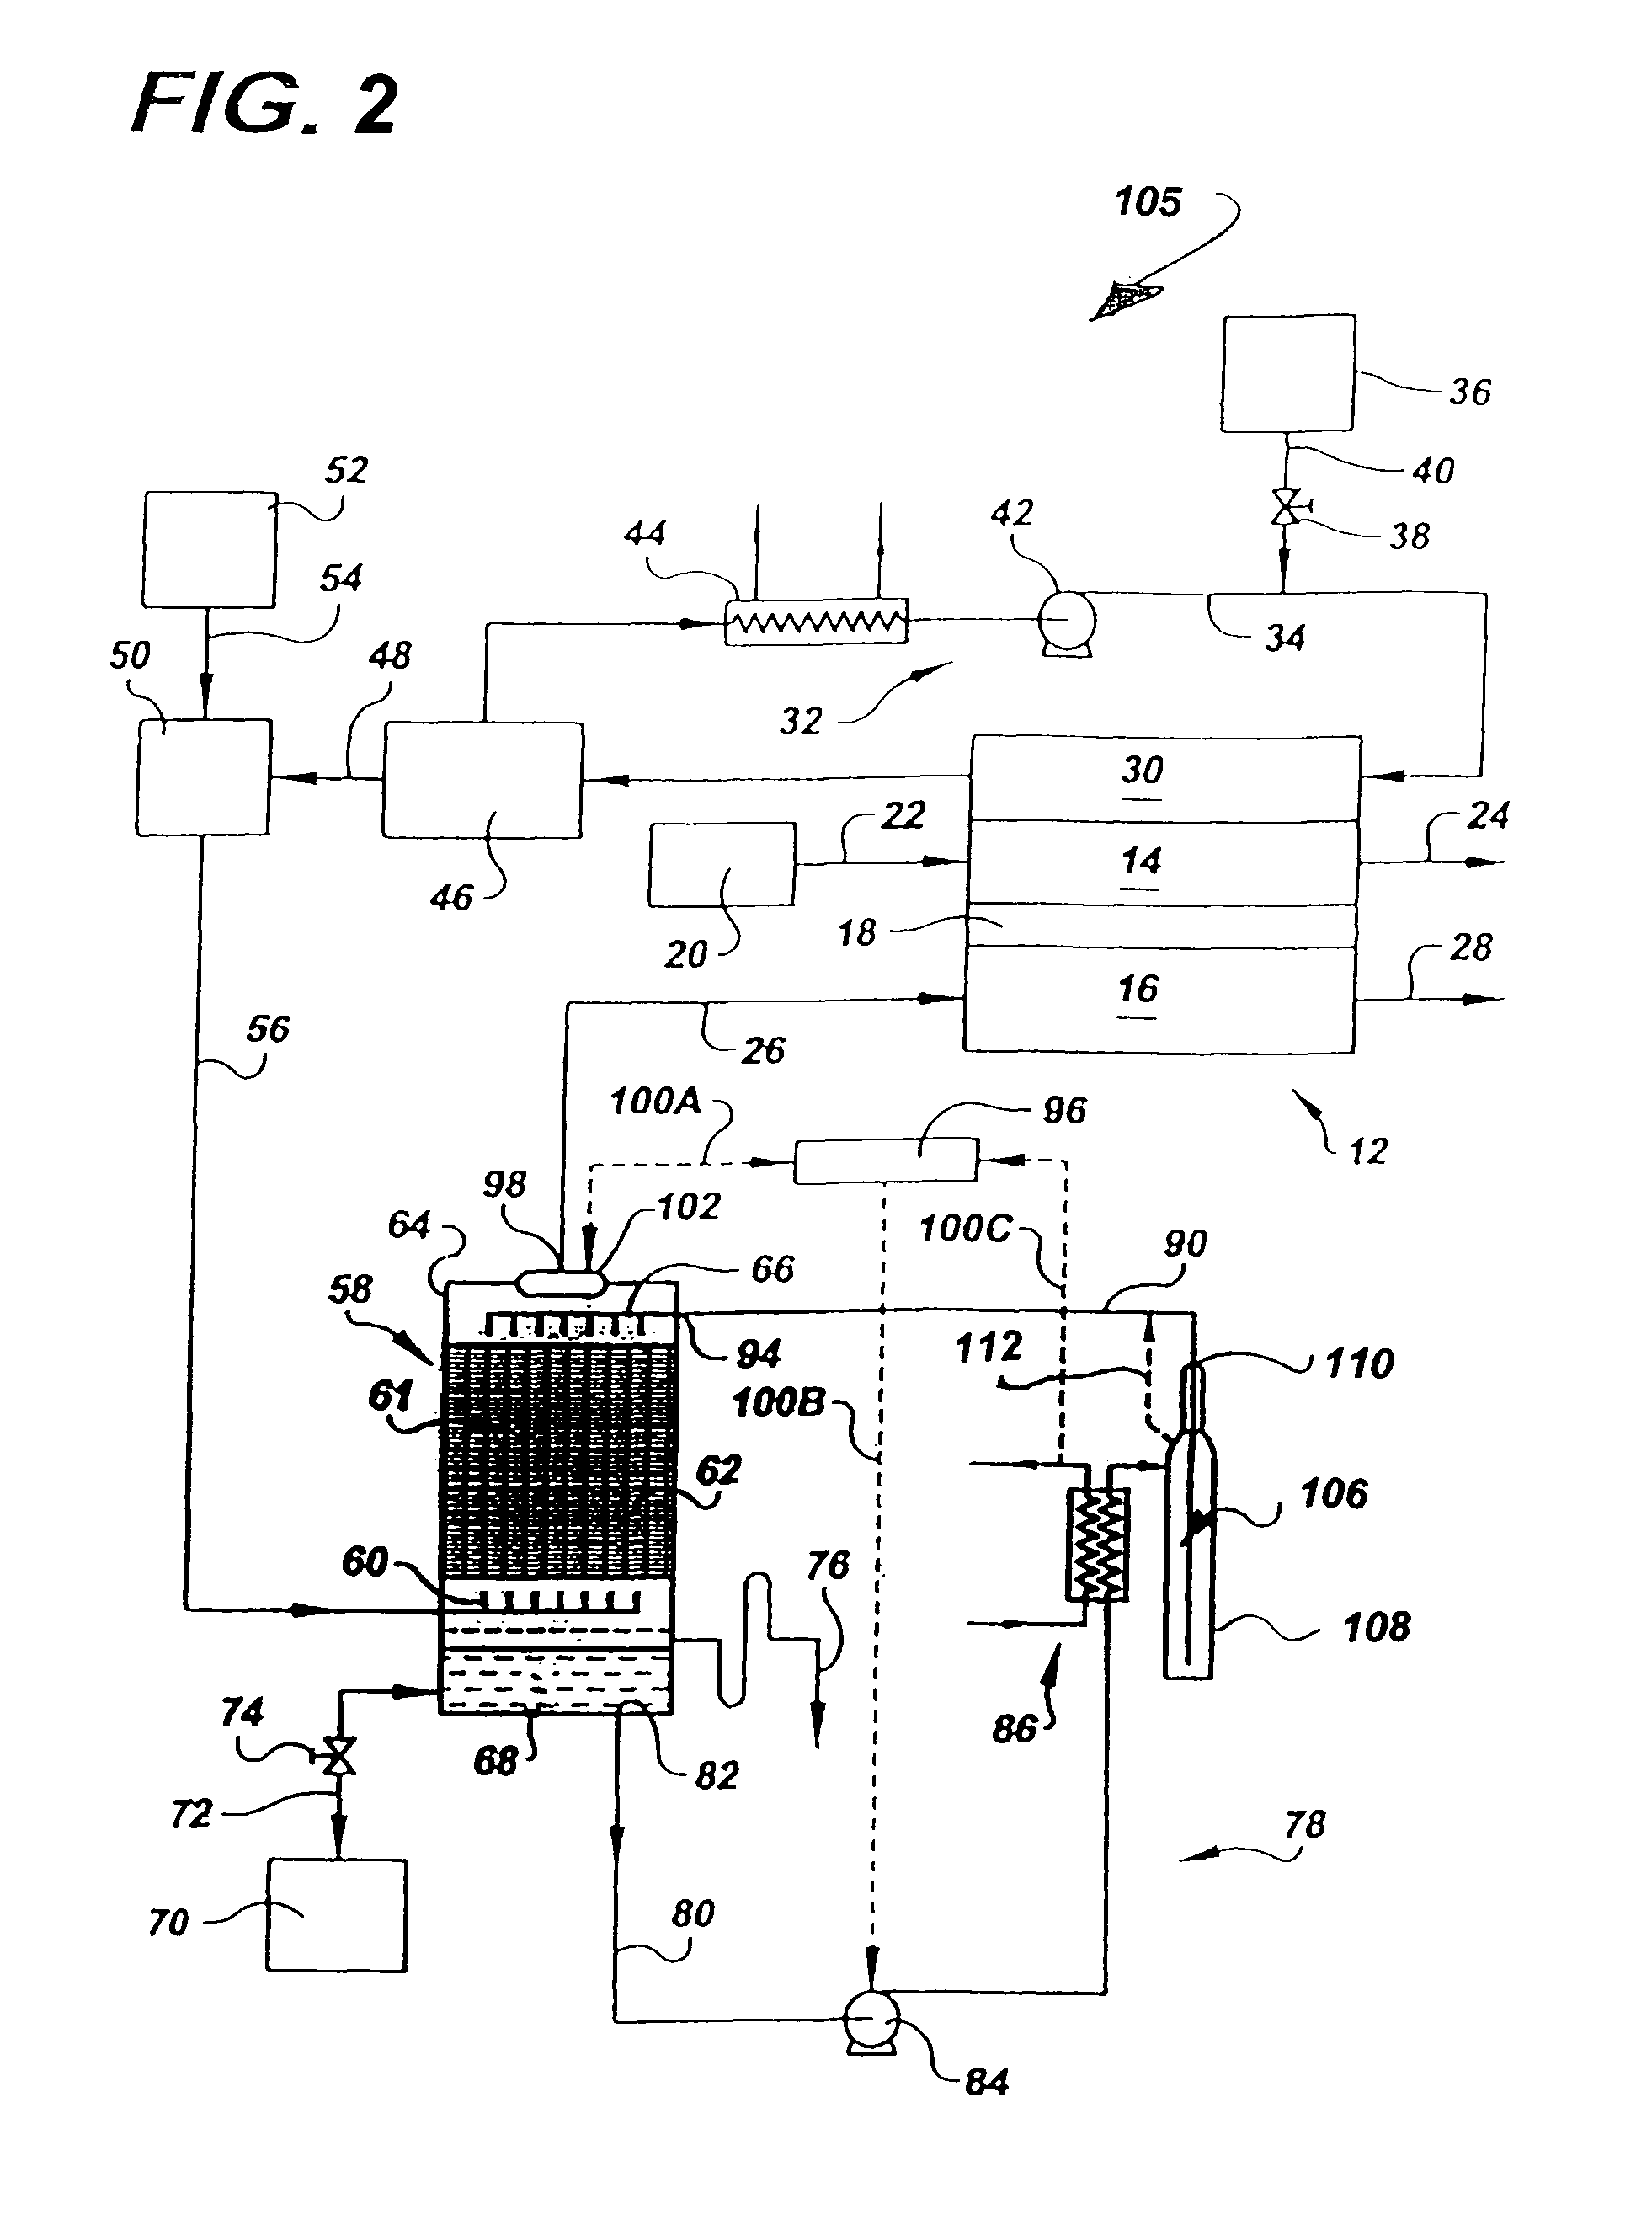 Integrated contaminant separator and water-control loop for a fuel reactant stream